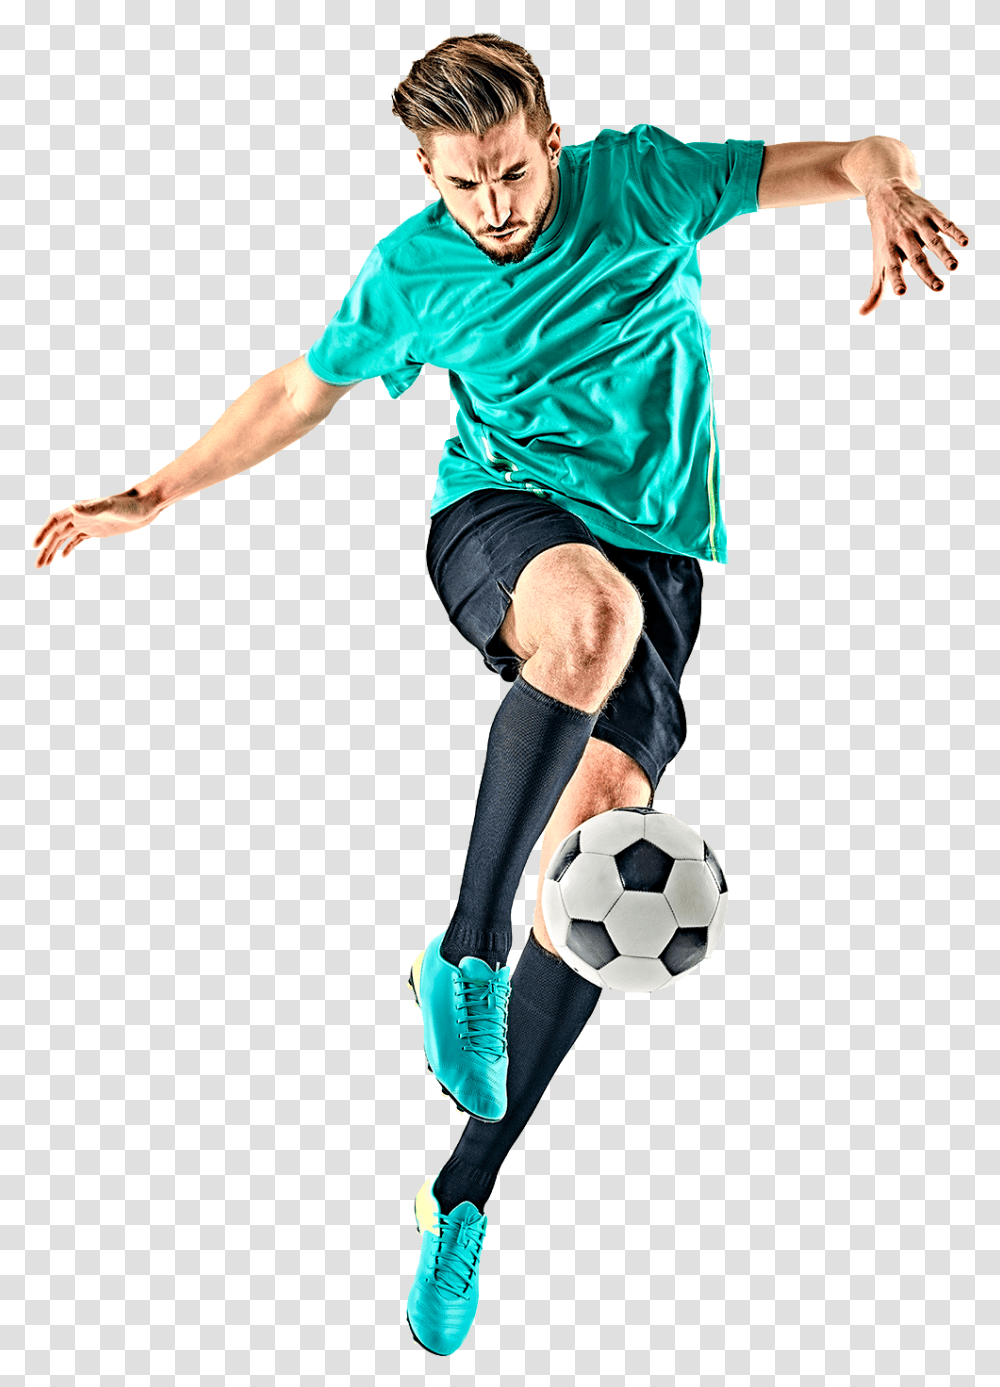 Football Player Epson Surecolor, Soccer Ball, Team Sport, Person, People Transparent Png